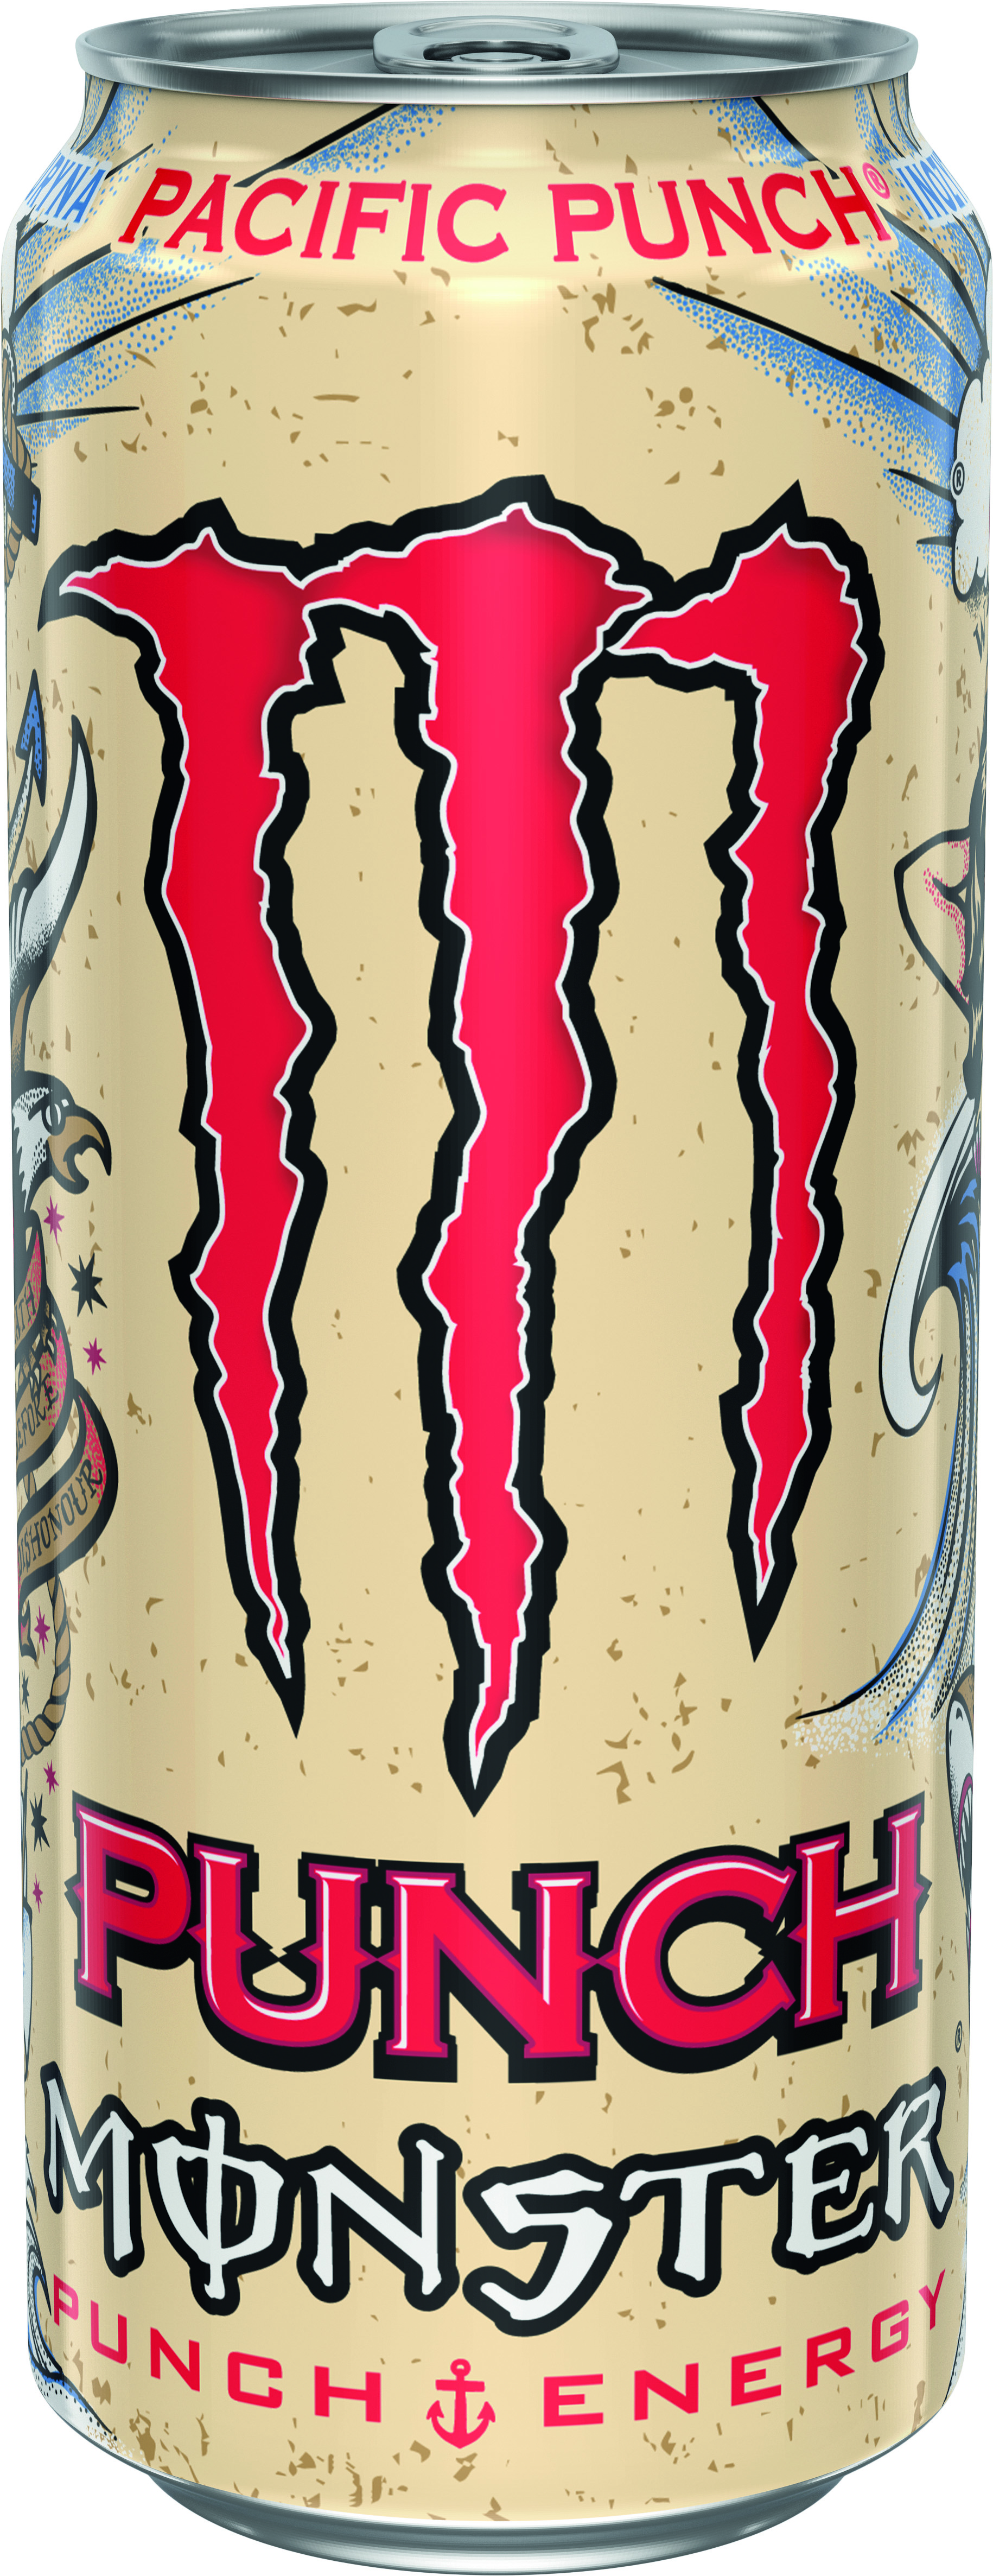 Monster_Pacific_Punch_500ml_Can_Hires